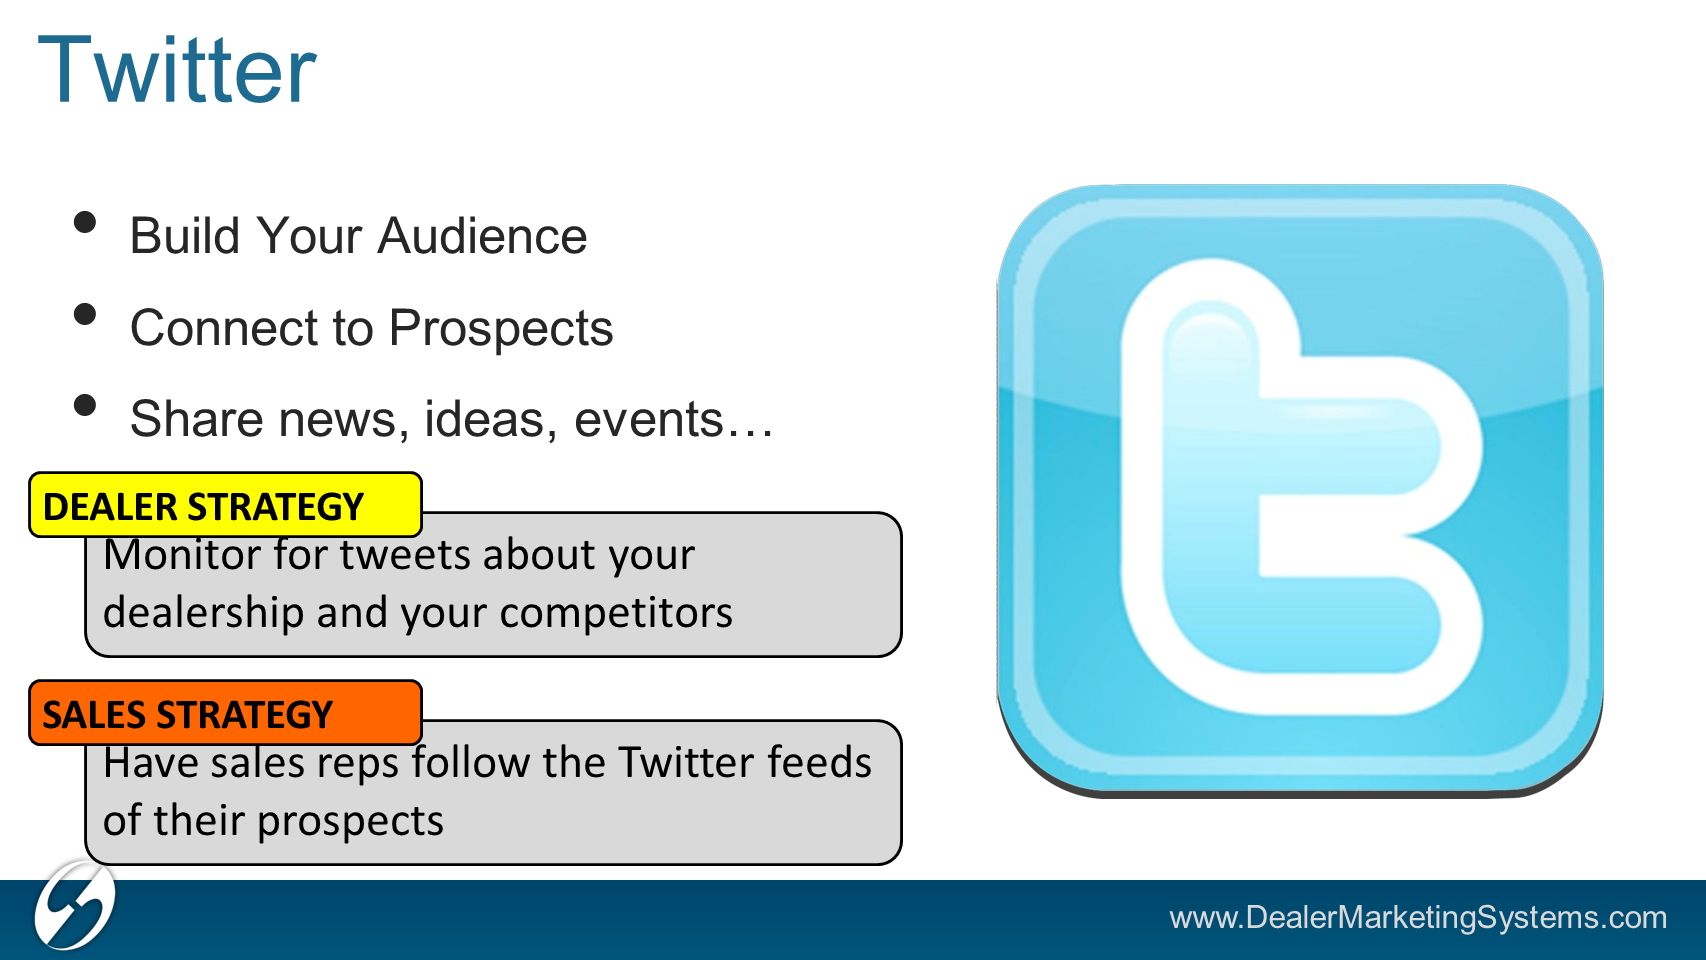 Twitter Build Your Audience Connect to Prospects Share news, ideas, events… Have sales reps follow the Twitter feeds of their prospects SALES STRATEGY Monitor for tweets about your dealership and your competitors DEALER STRATEGY